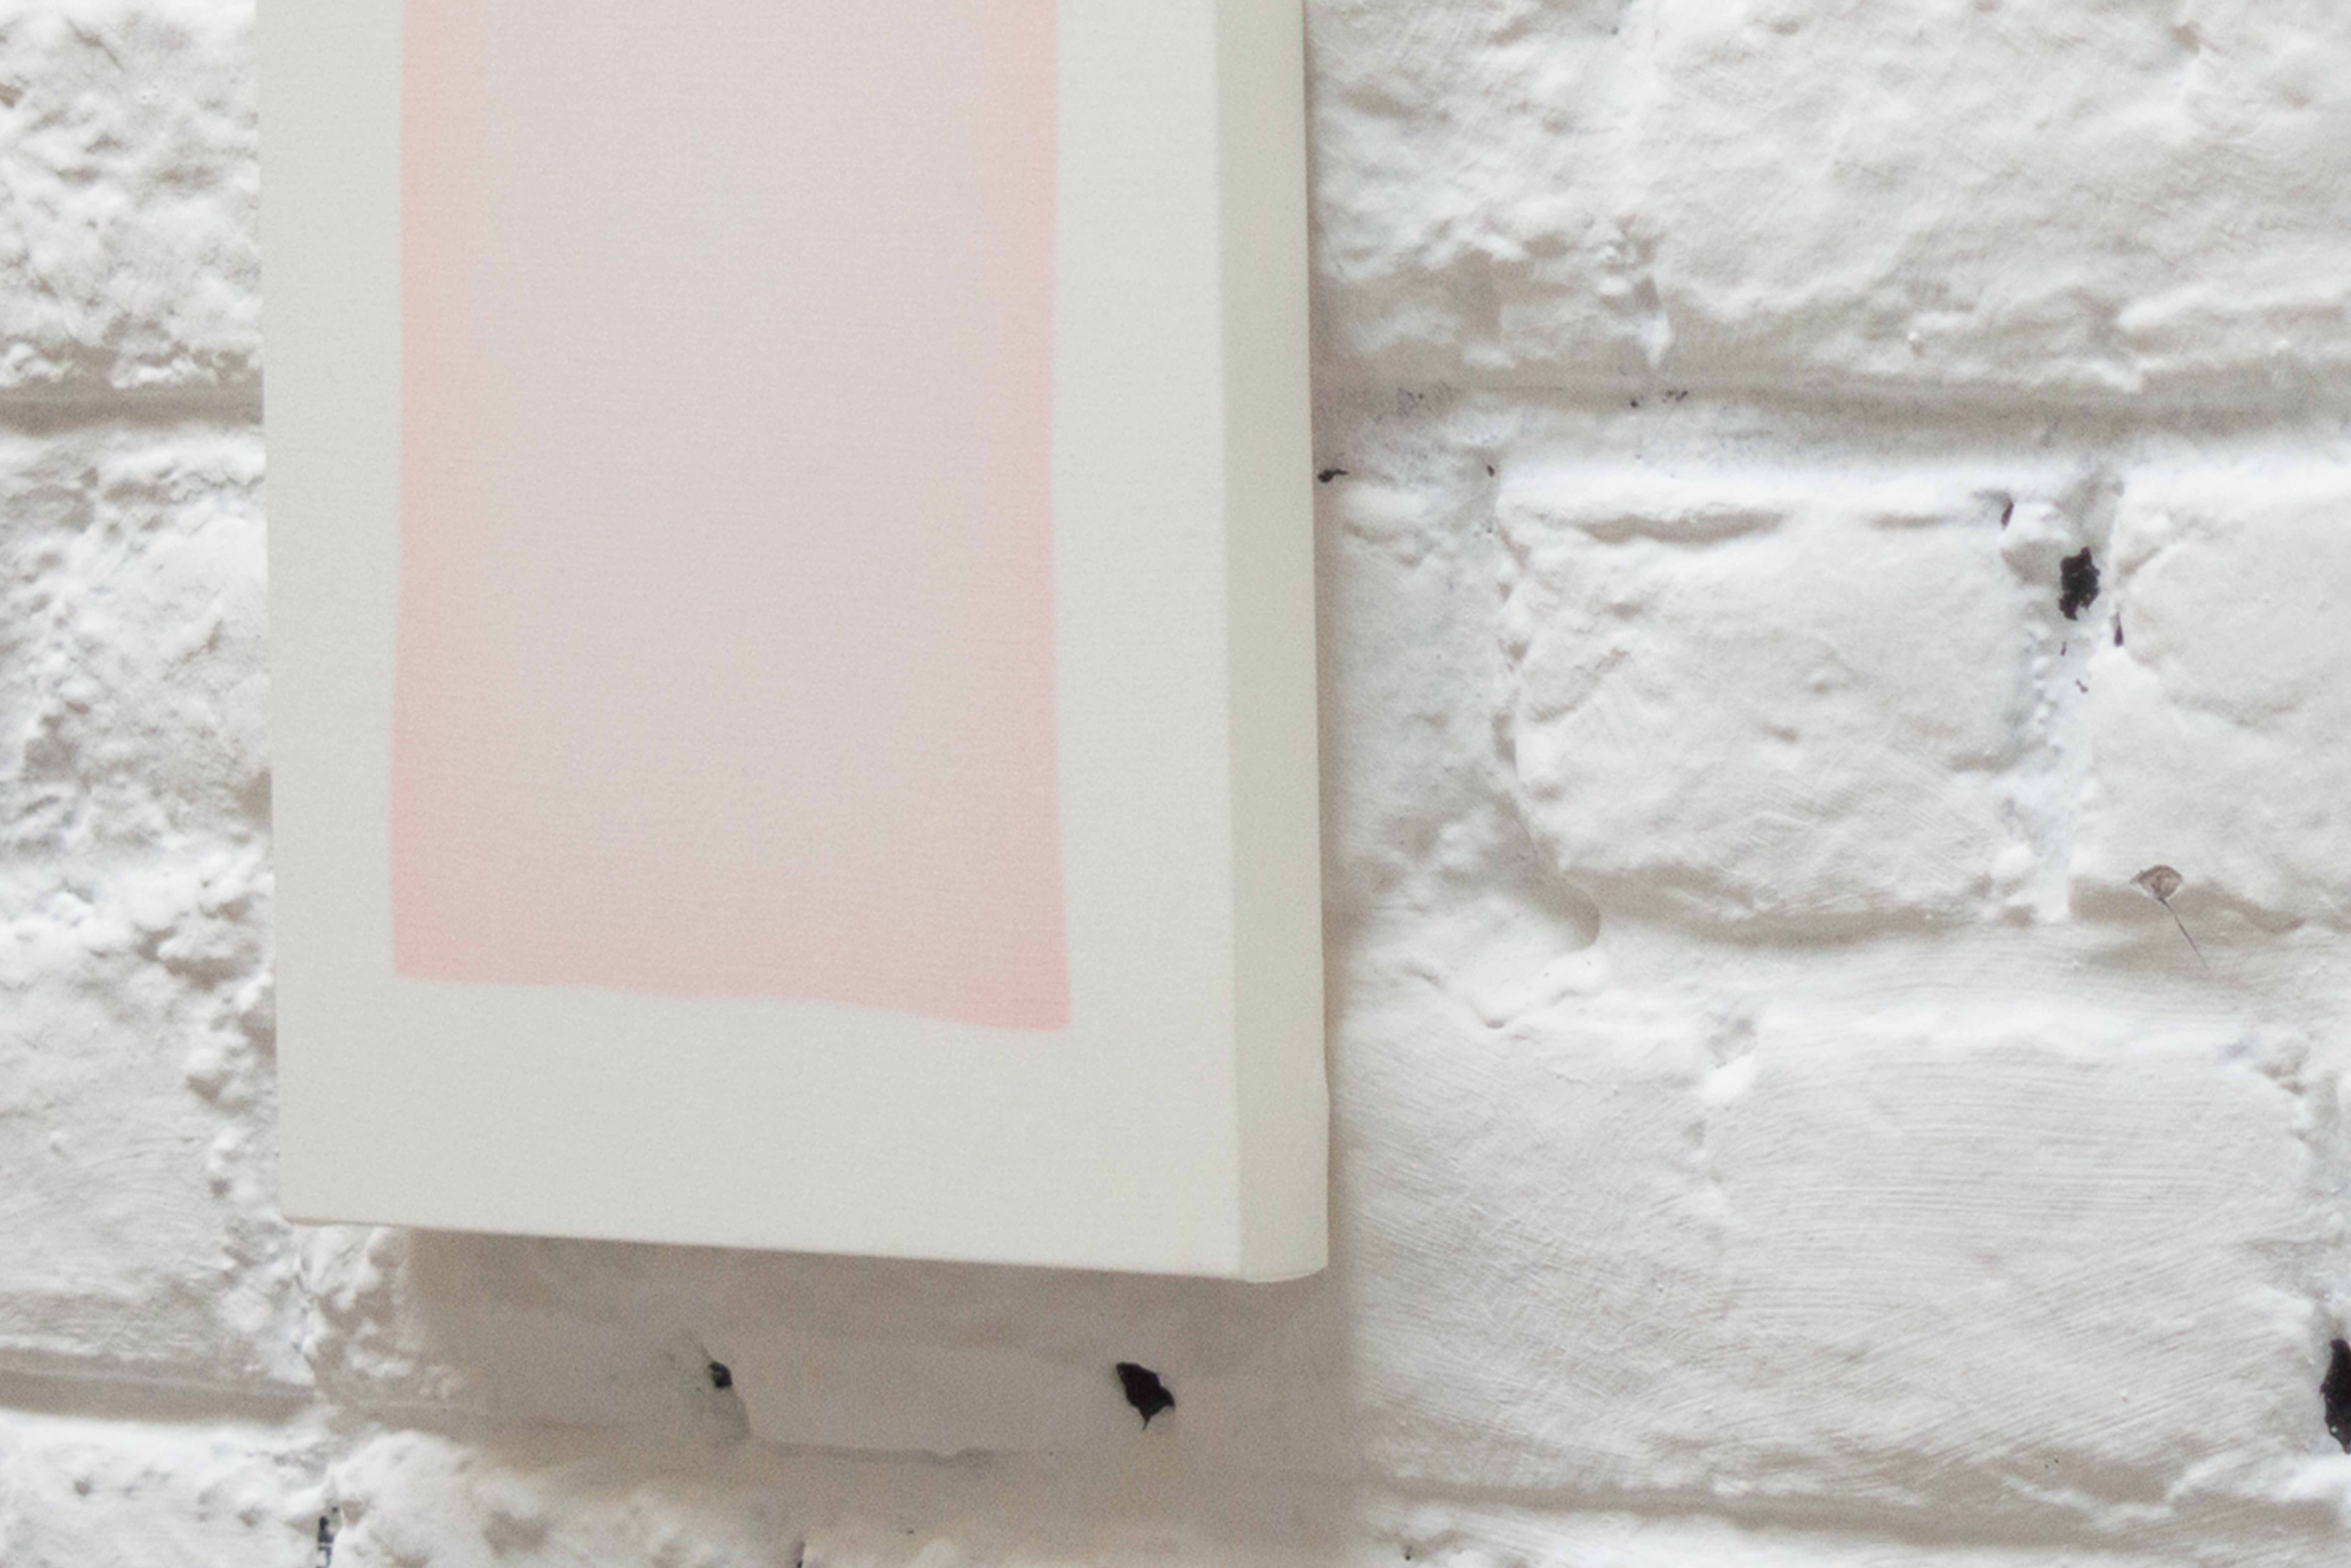 Pink rectangular shape against a white background